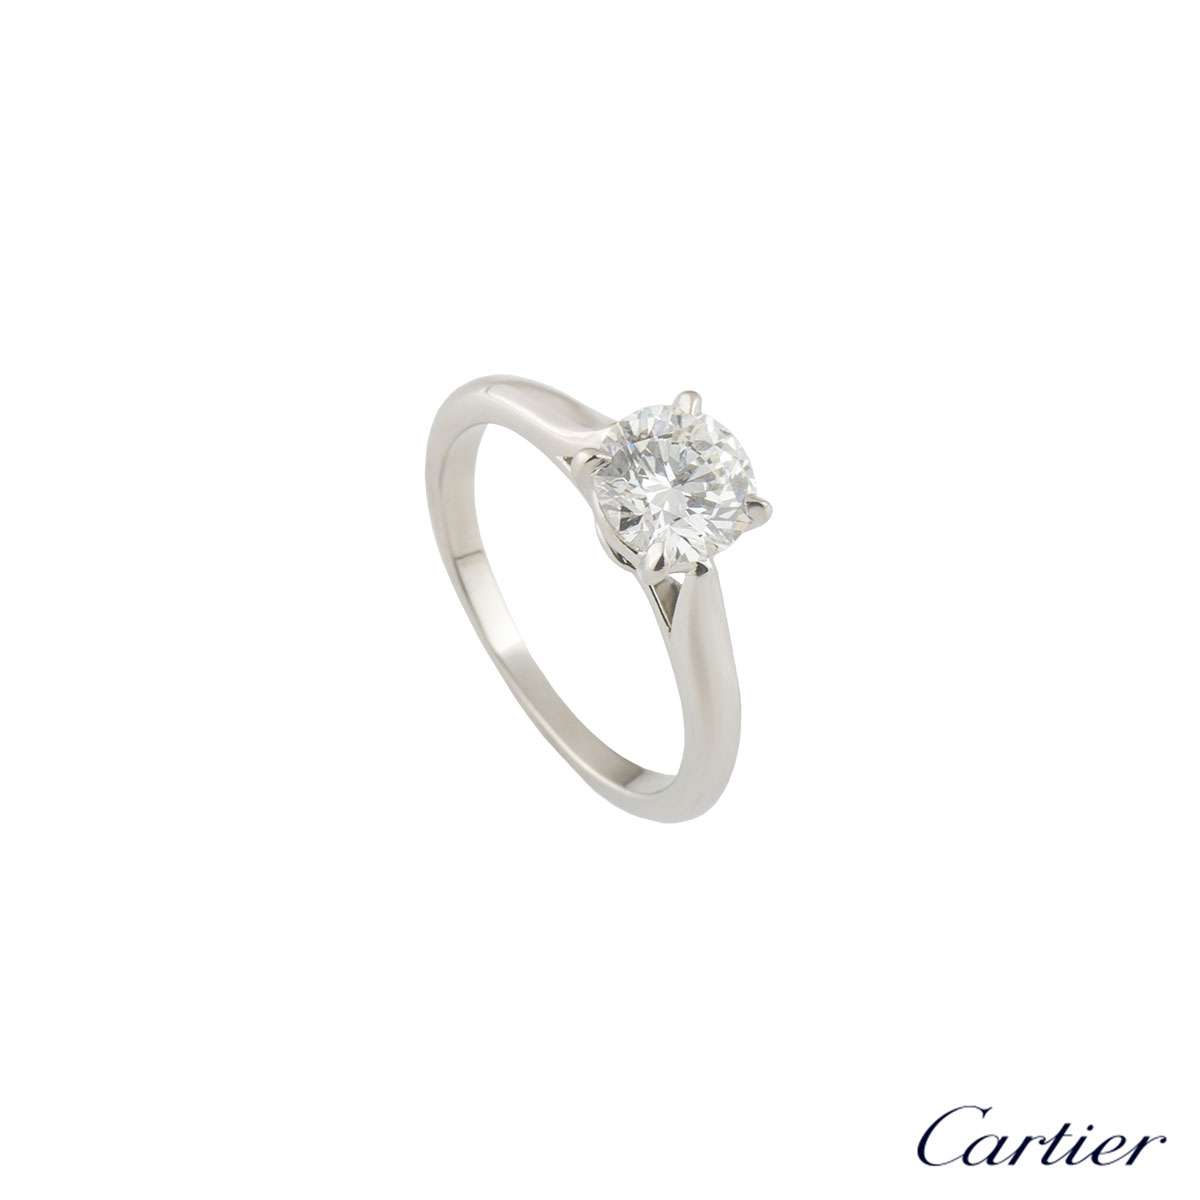 Cartier Solitaire 1895 Diamond Ring 1 